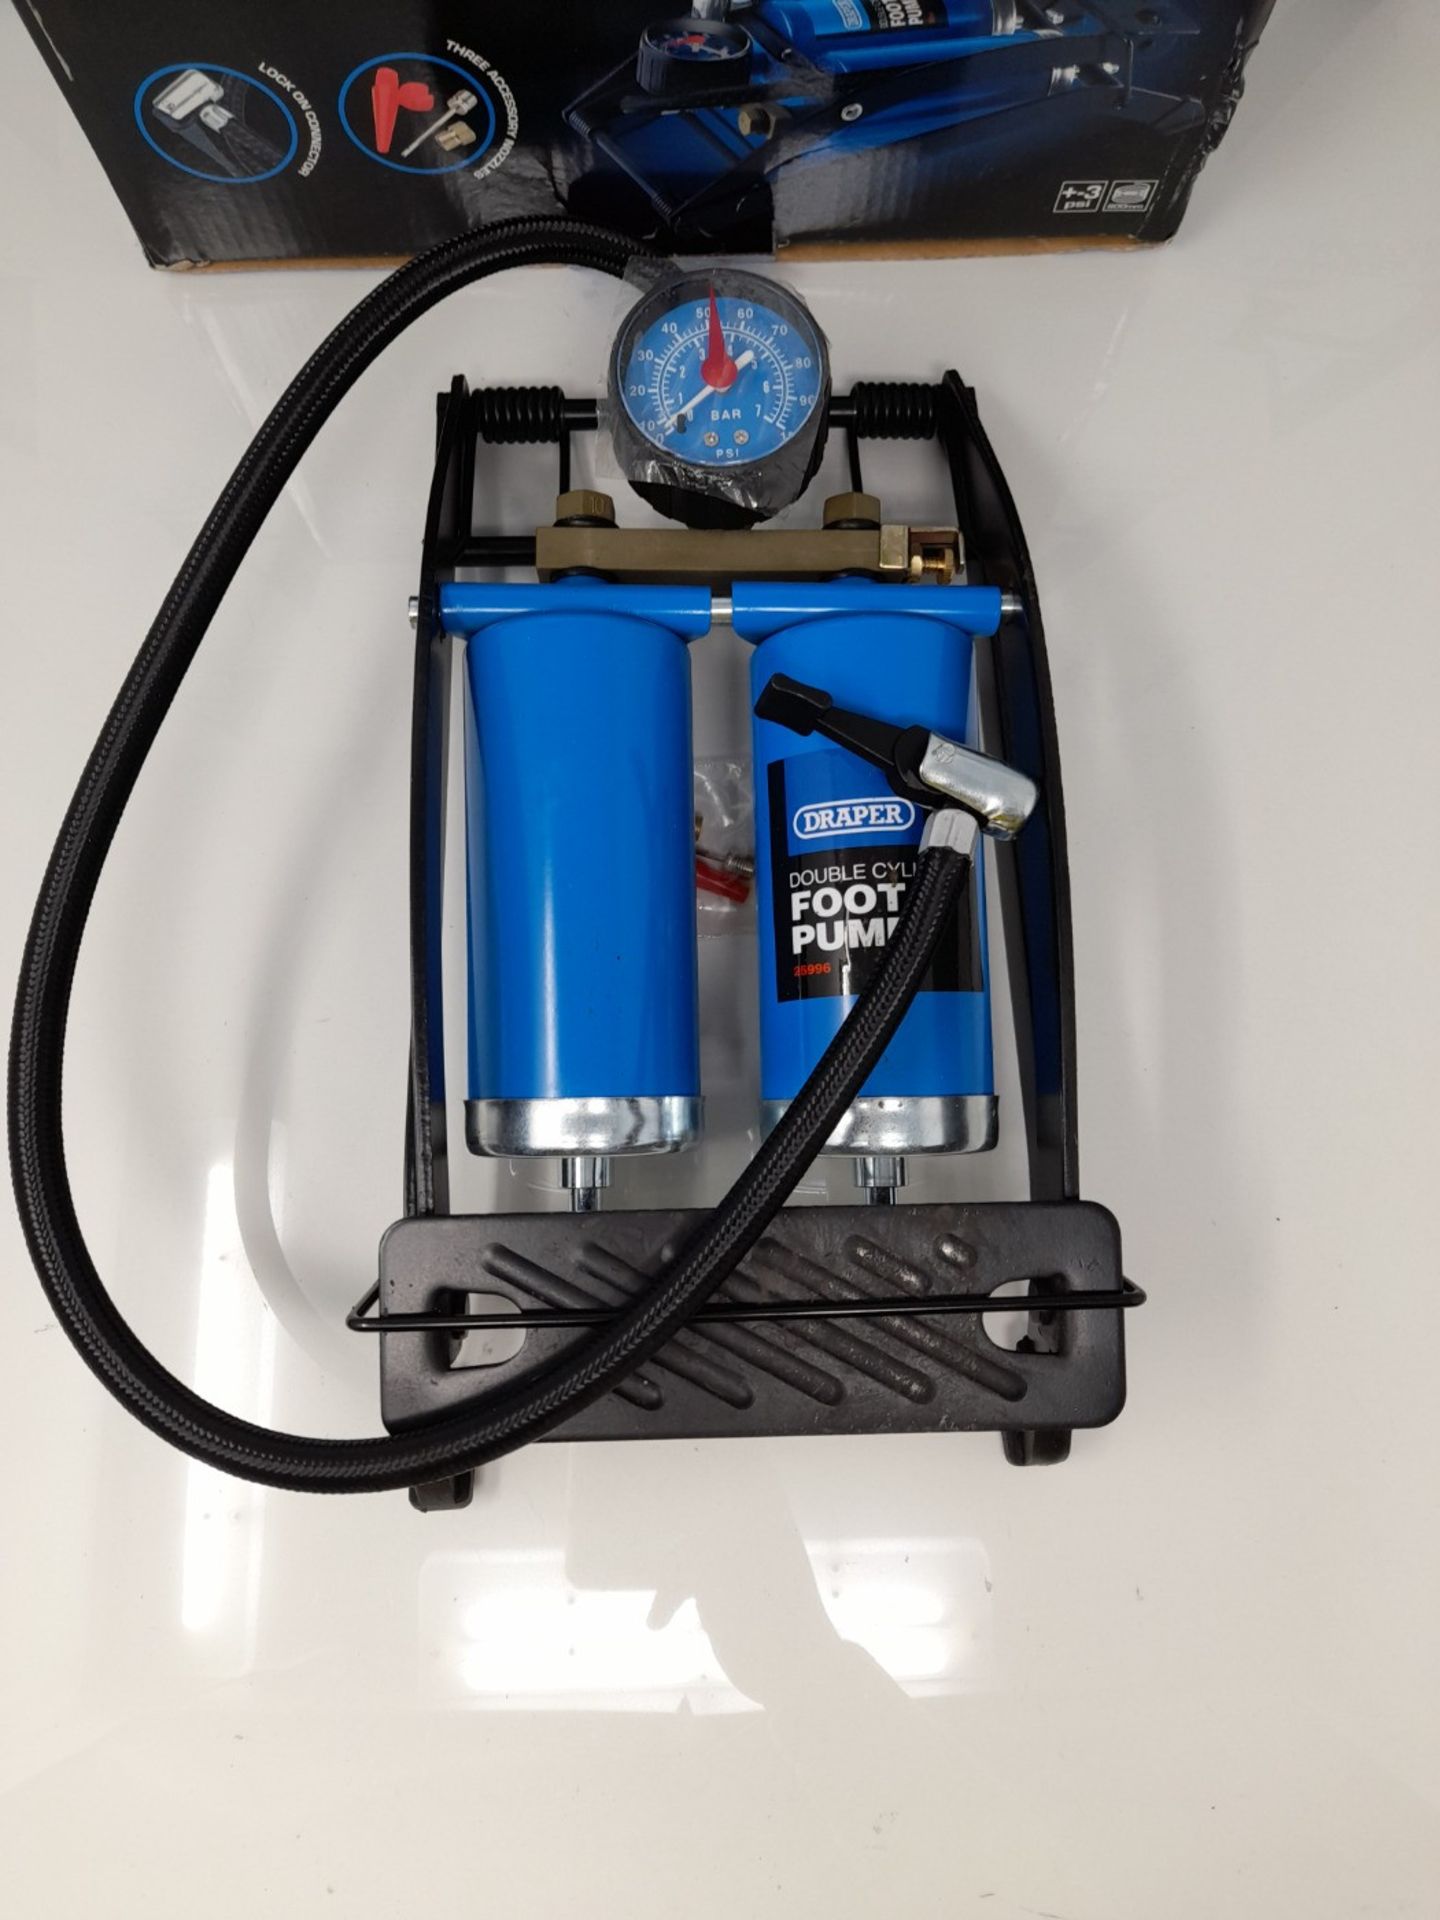 Draper Double-Cylinder Foot Pump with Pressure Gauge & Accessories - 25996 - Manual In - Image 2 of 2